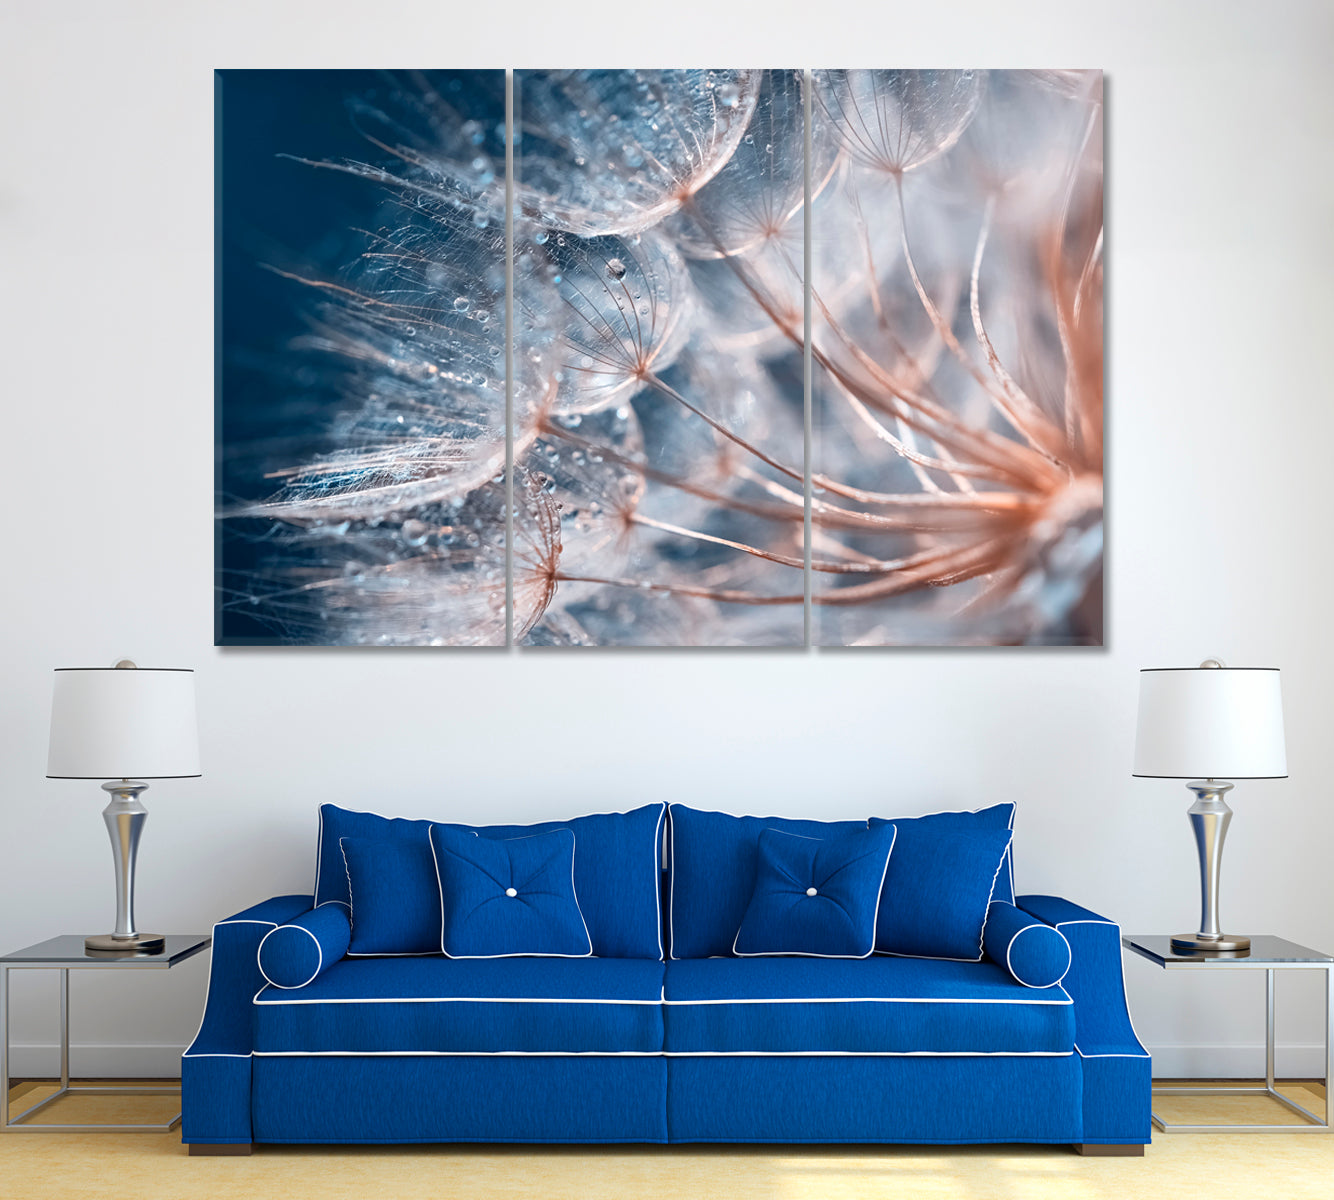 Dandelion with Water Drops Canvas Print ArtLexy 3 Panels 36"x24" inches 